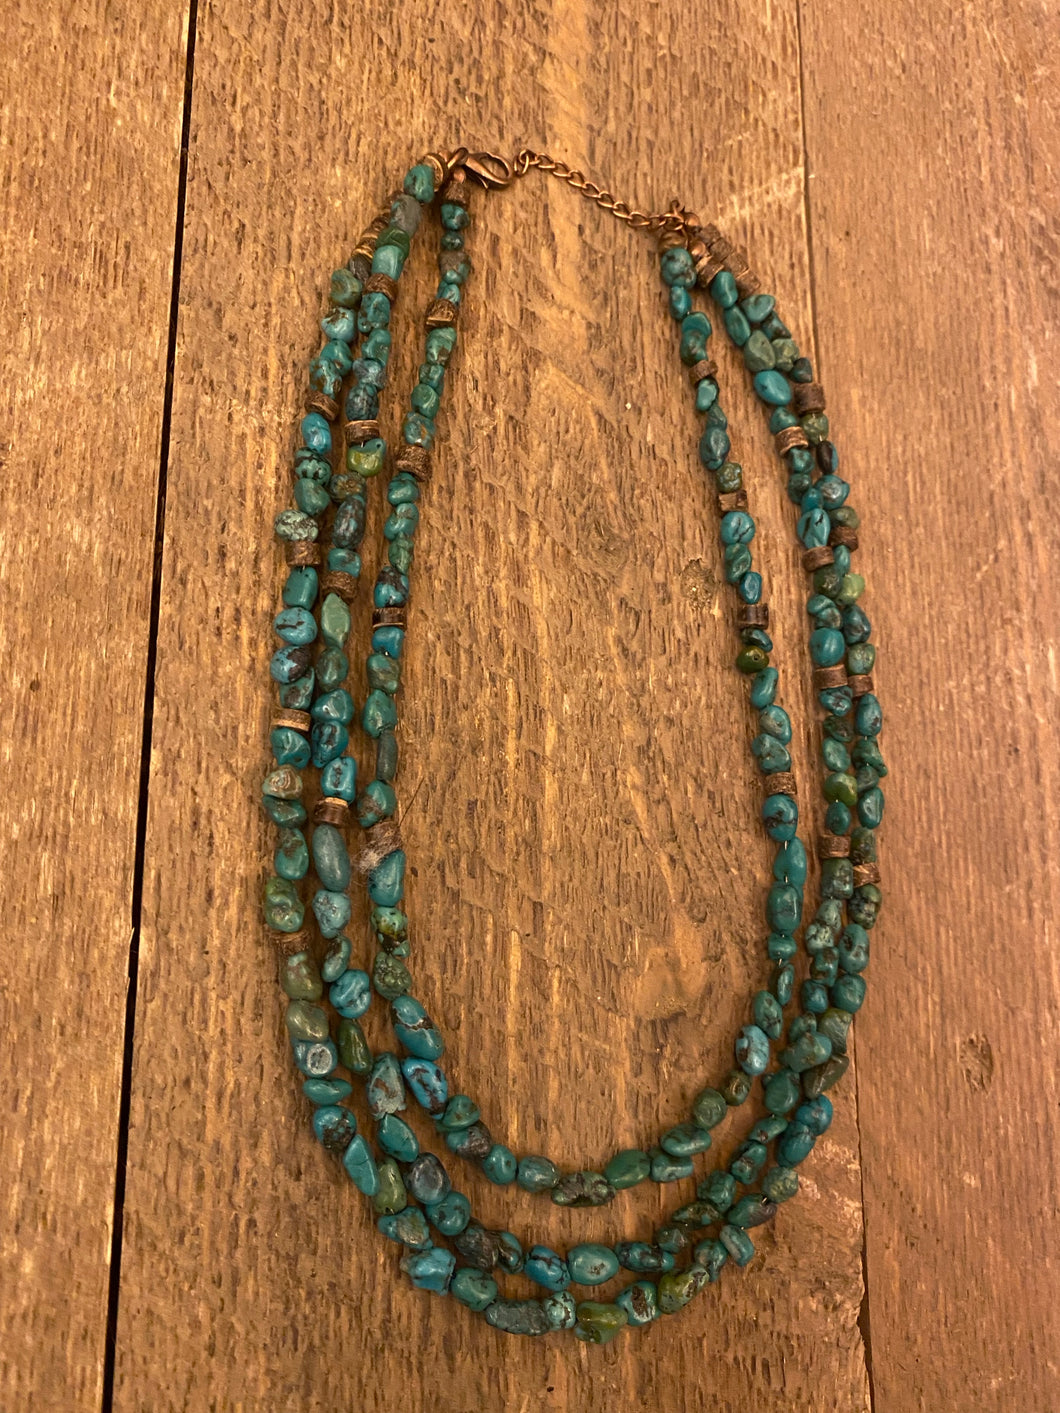 Triple strand natural turquoise and Wood necklace